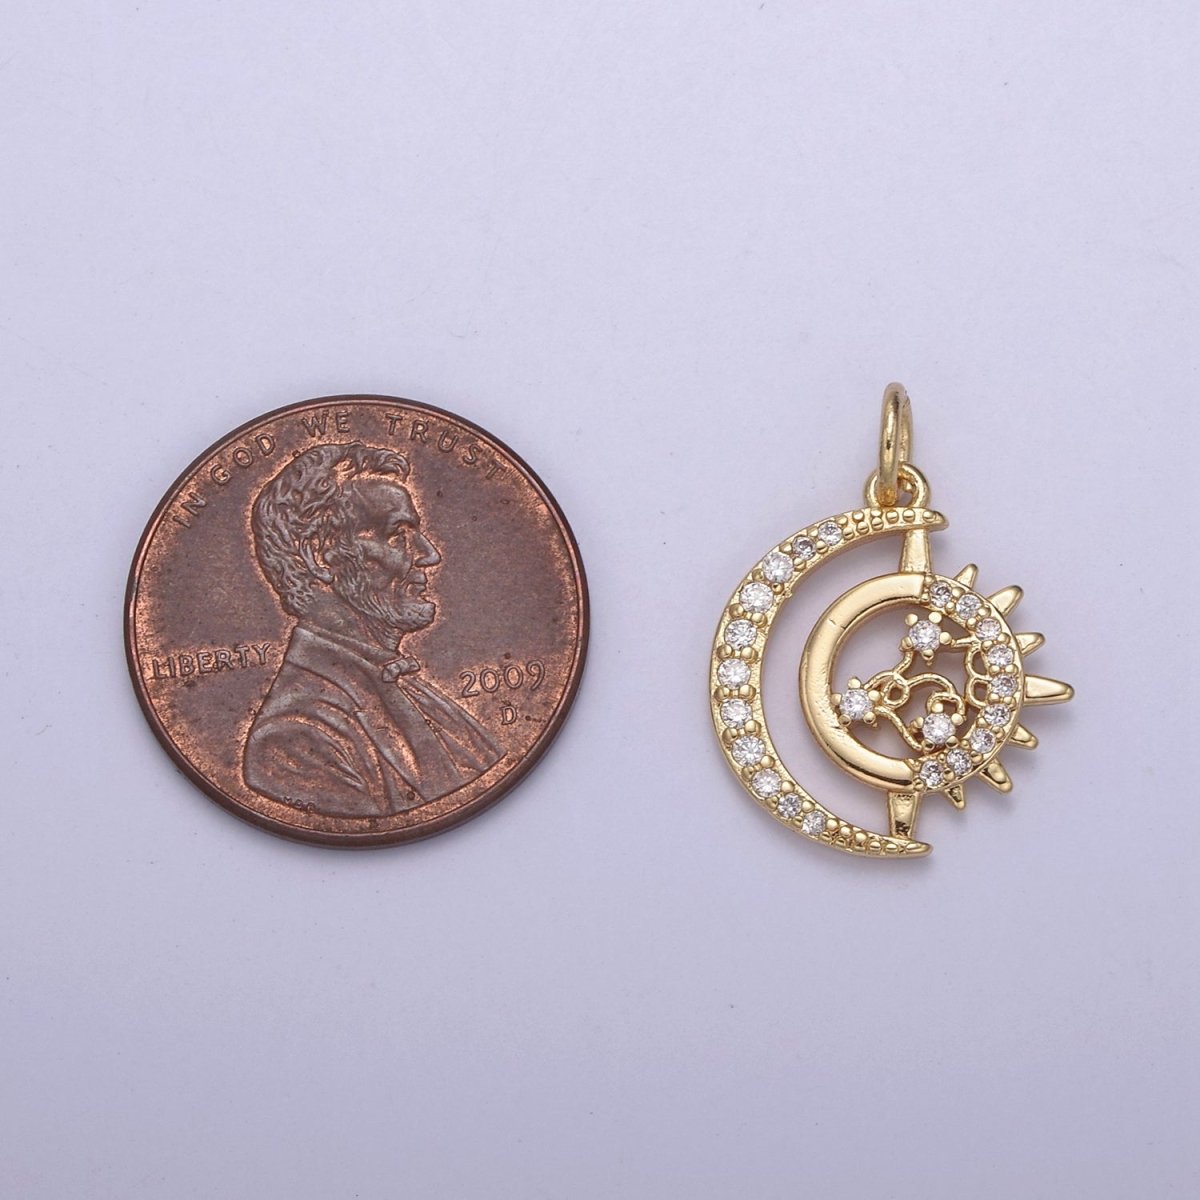 Dainty Crescent Moon Charm Micro Pave Celestial Jewelry 18K Gold Filled Moon Sun Charm N-703 - DLUXCA